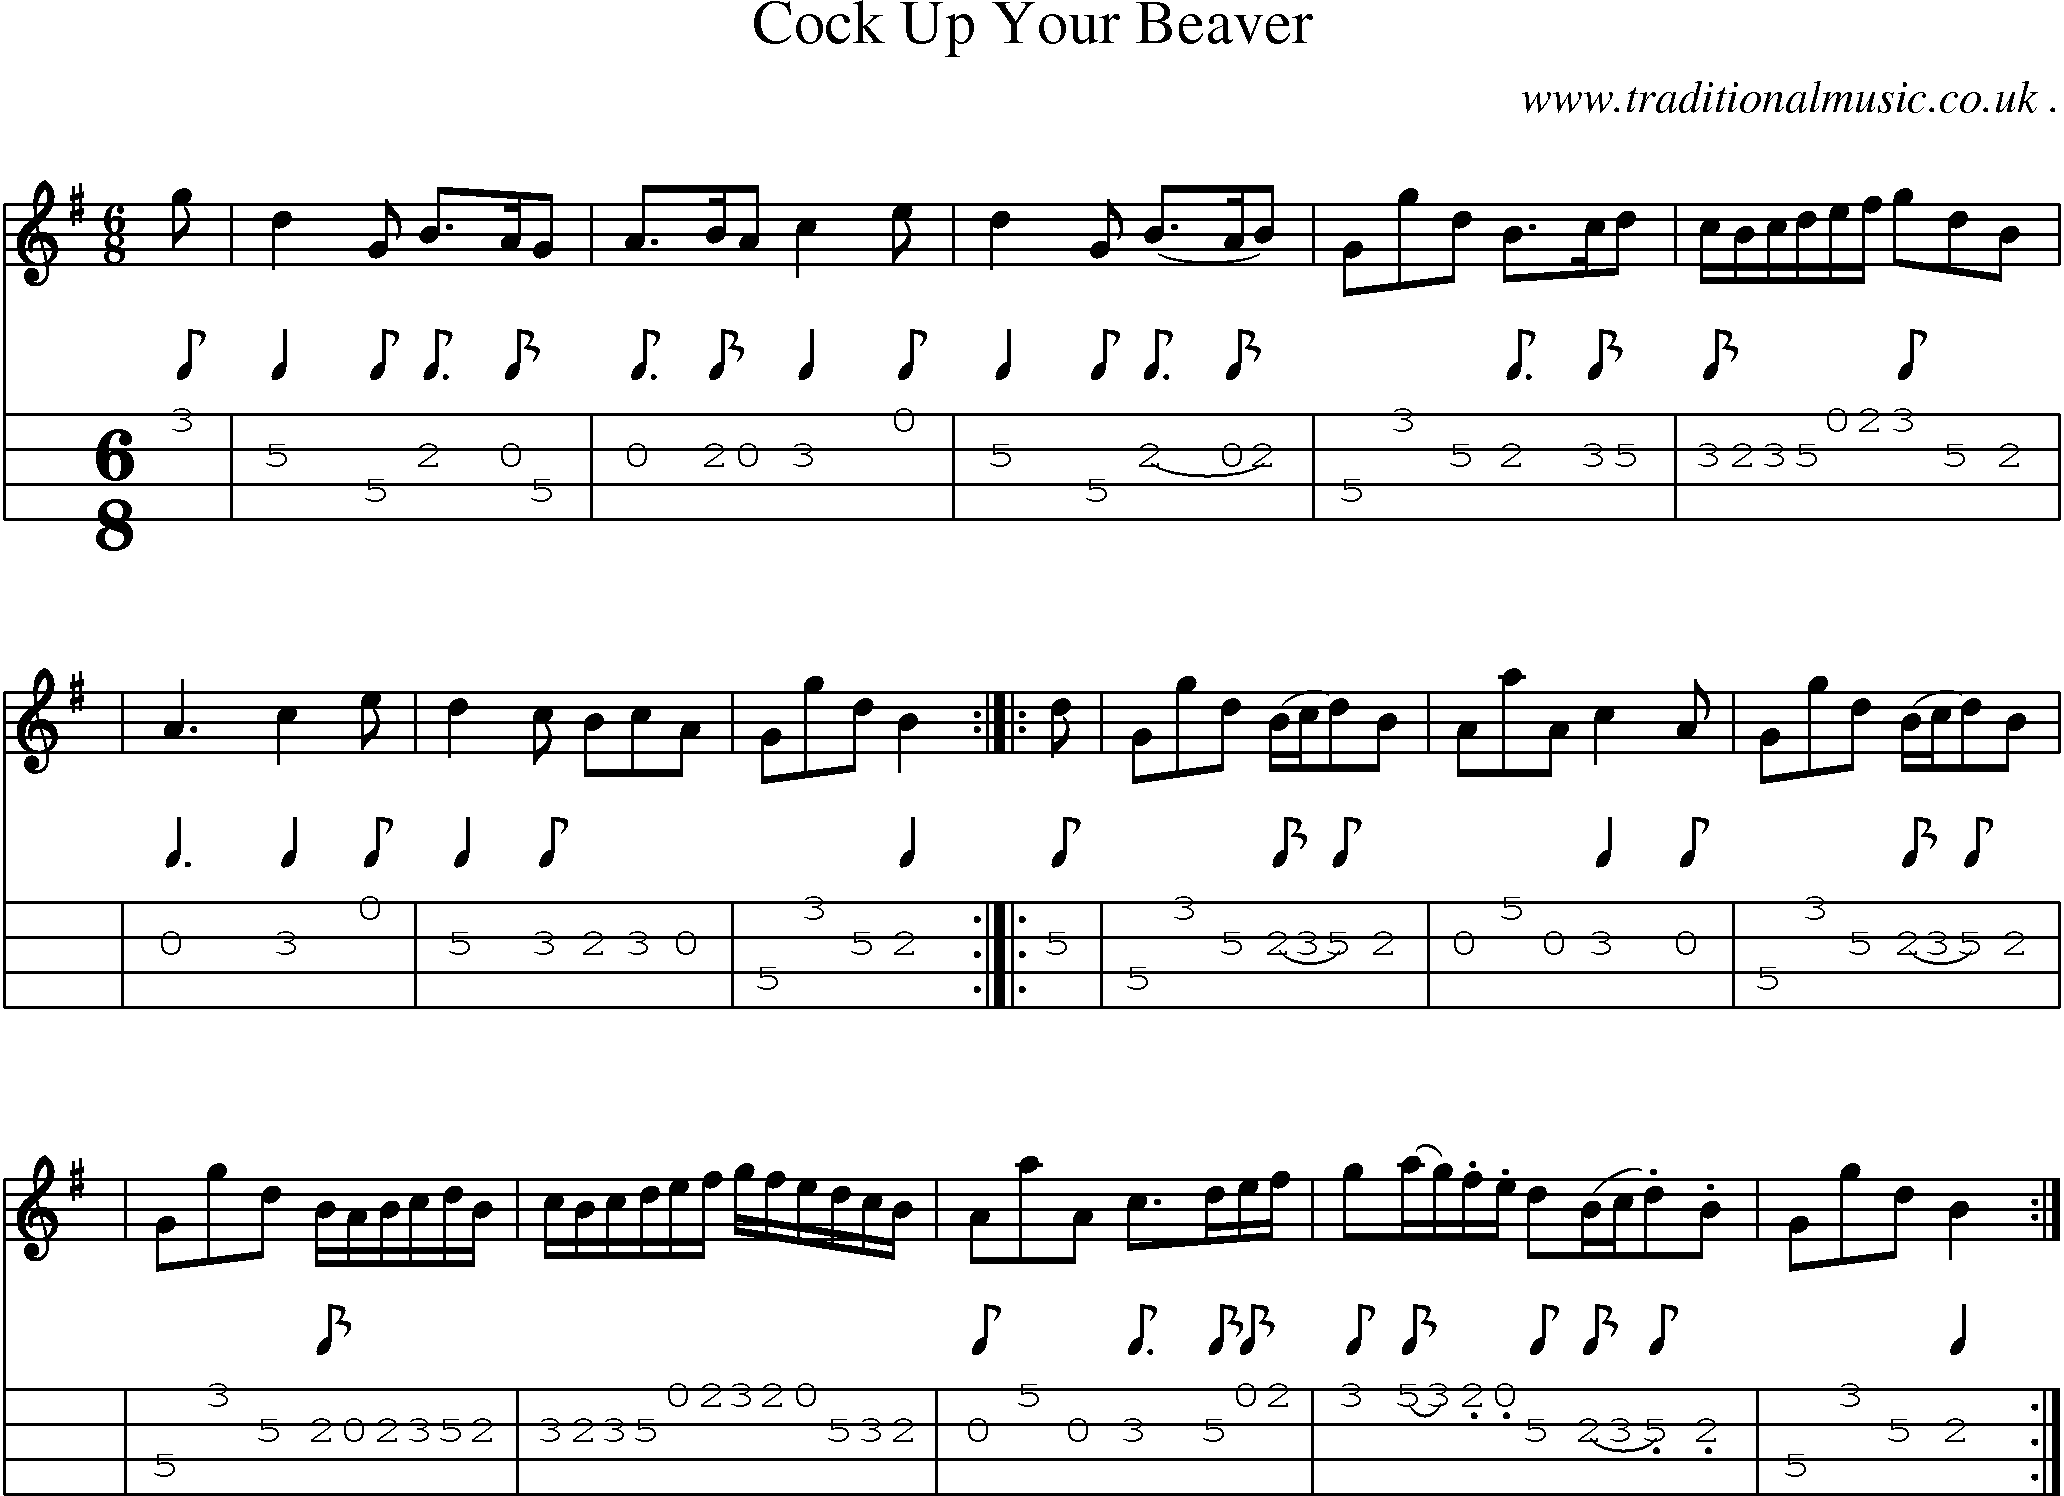 Sheet-music  score, Chords and Mandolin Tabs for Cock Up Your Beaver